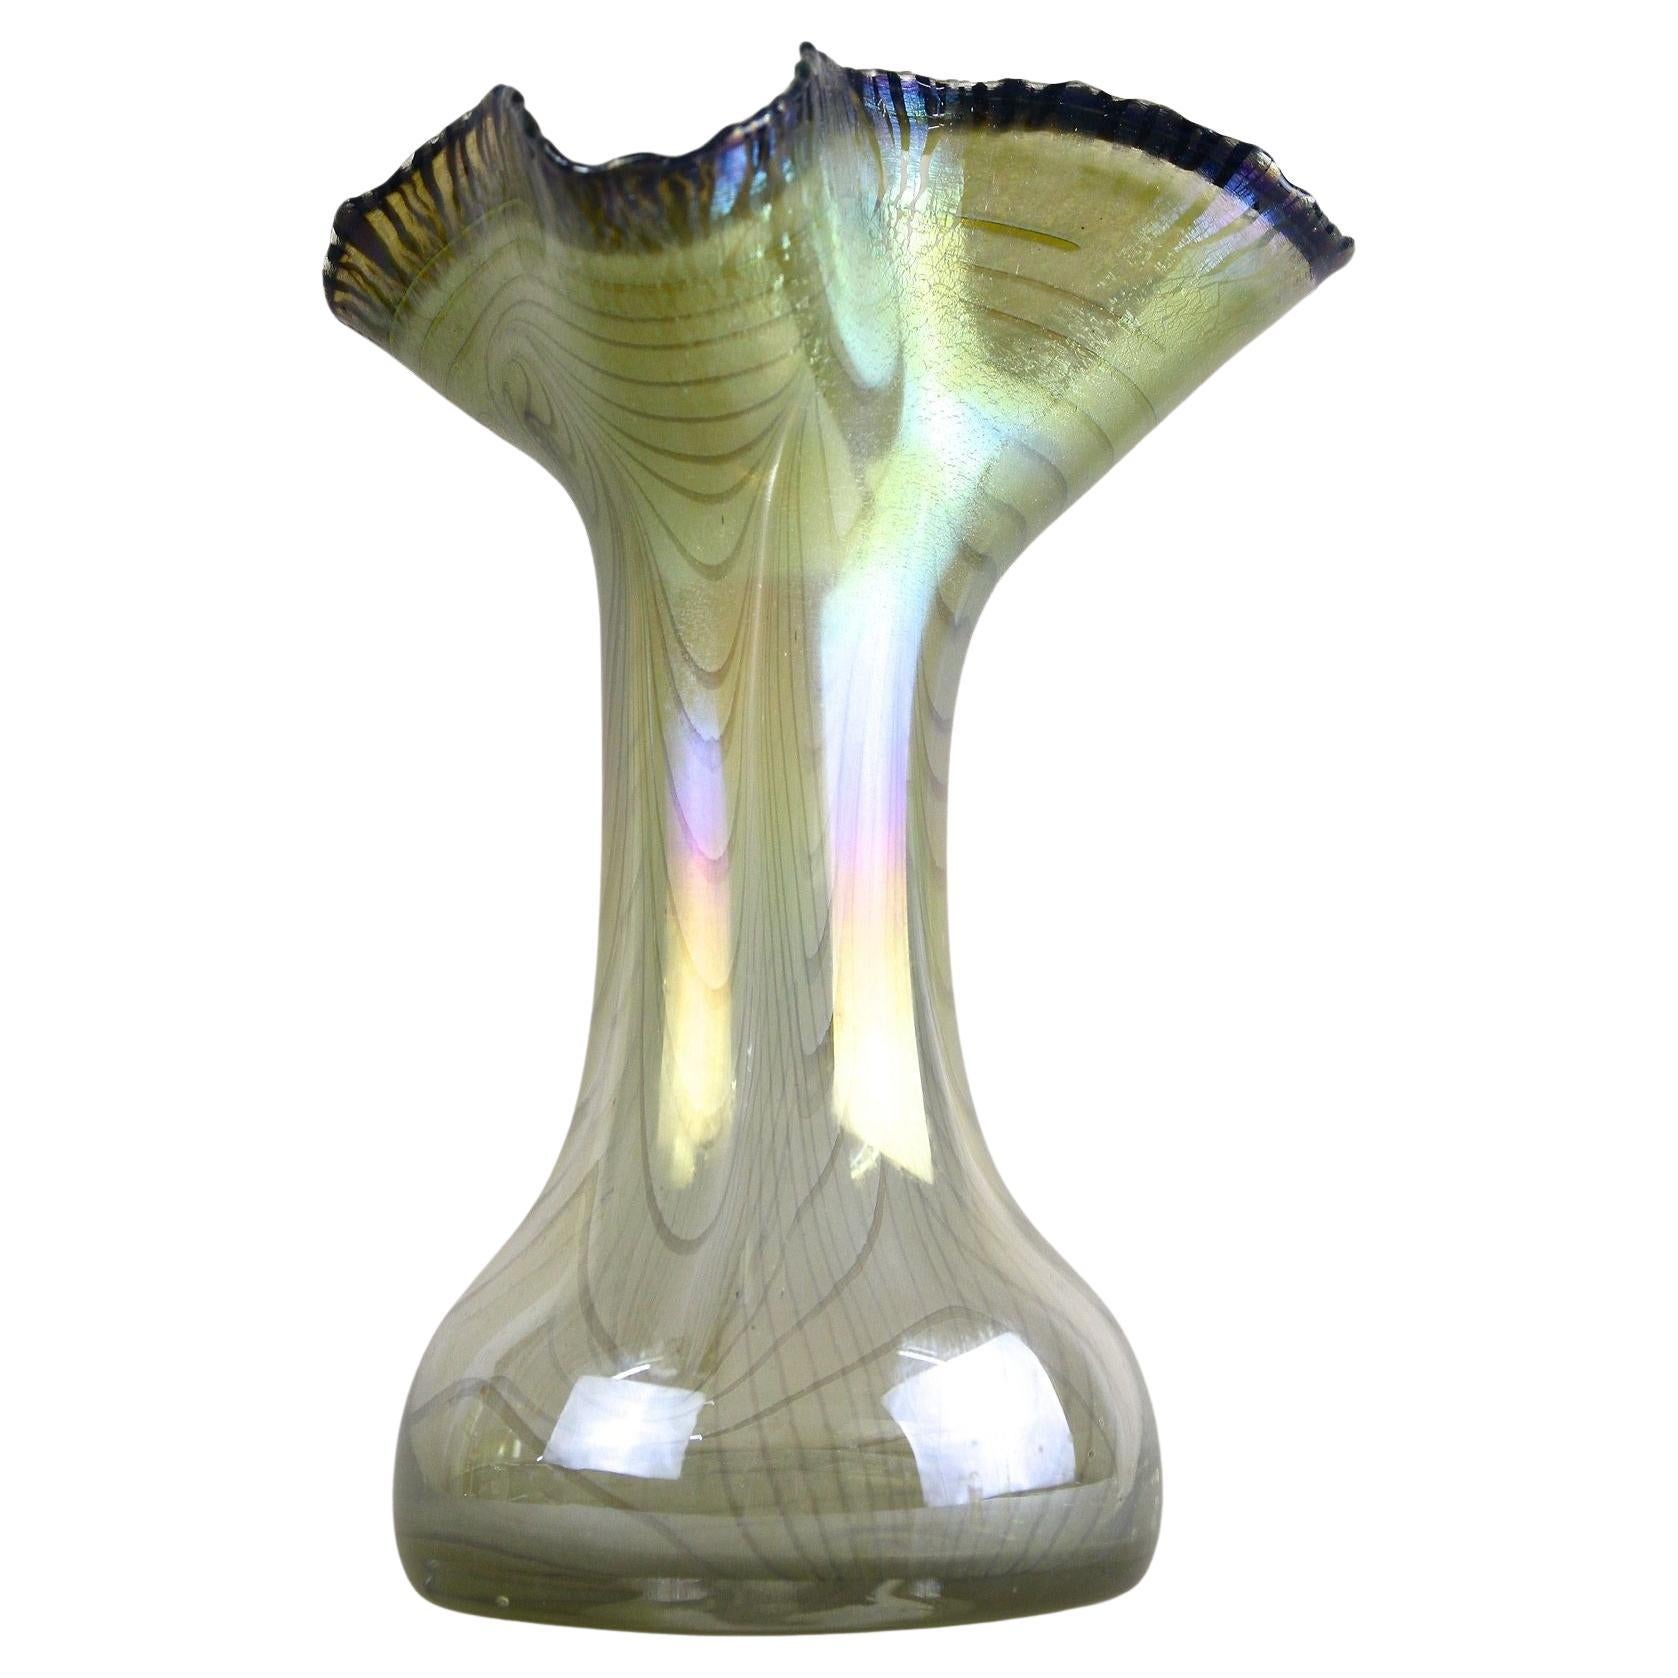 20th Century Iridescent Glass Vase by E. Eisch - Signed, Germany 1982